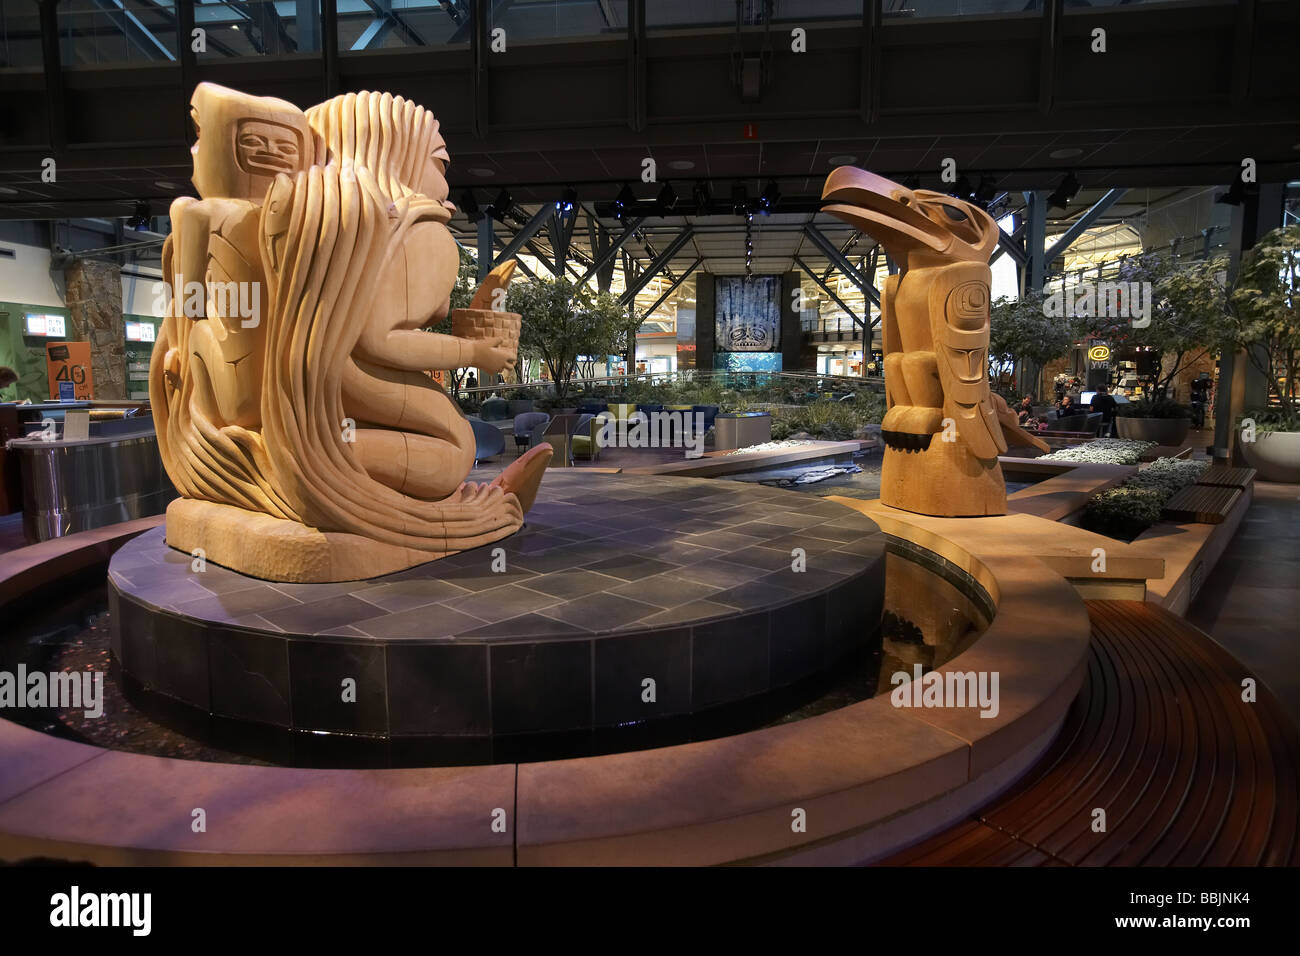 Wooden sculptures in the terminal at Vancouver international airport British Columbia Canada Stock Photo